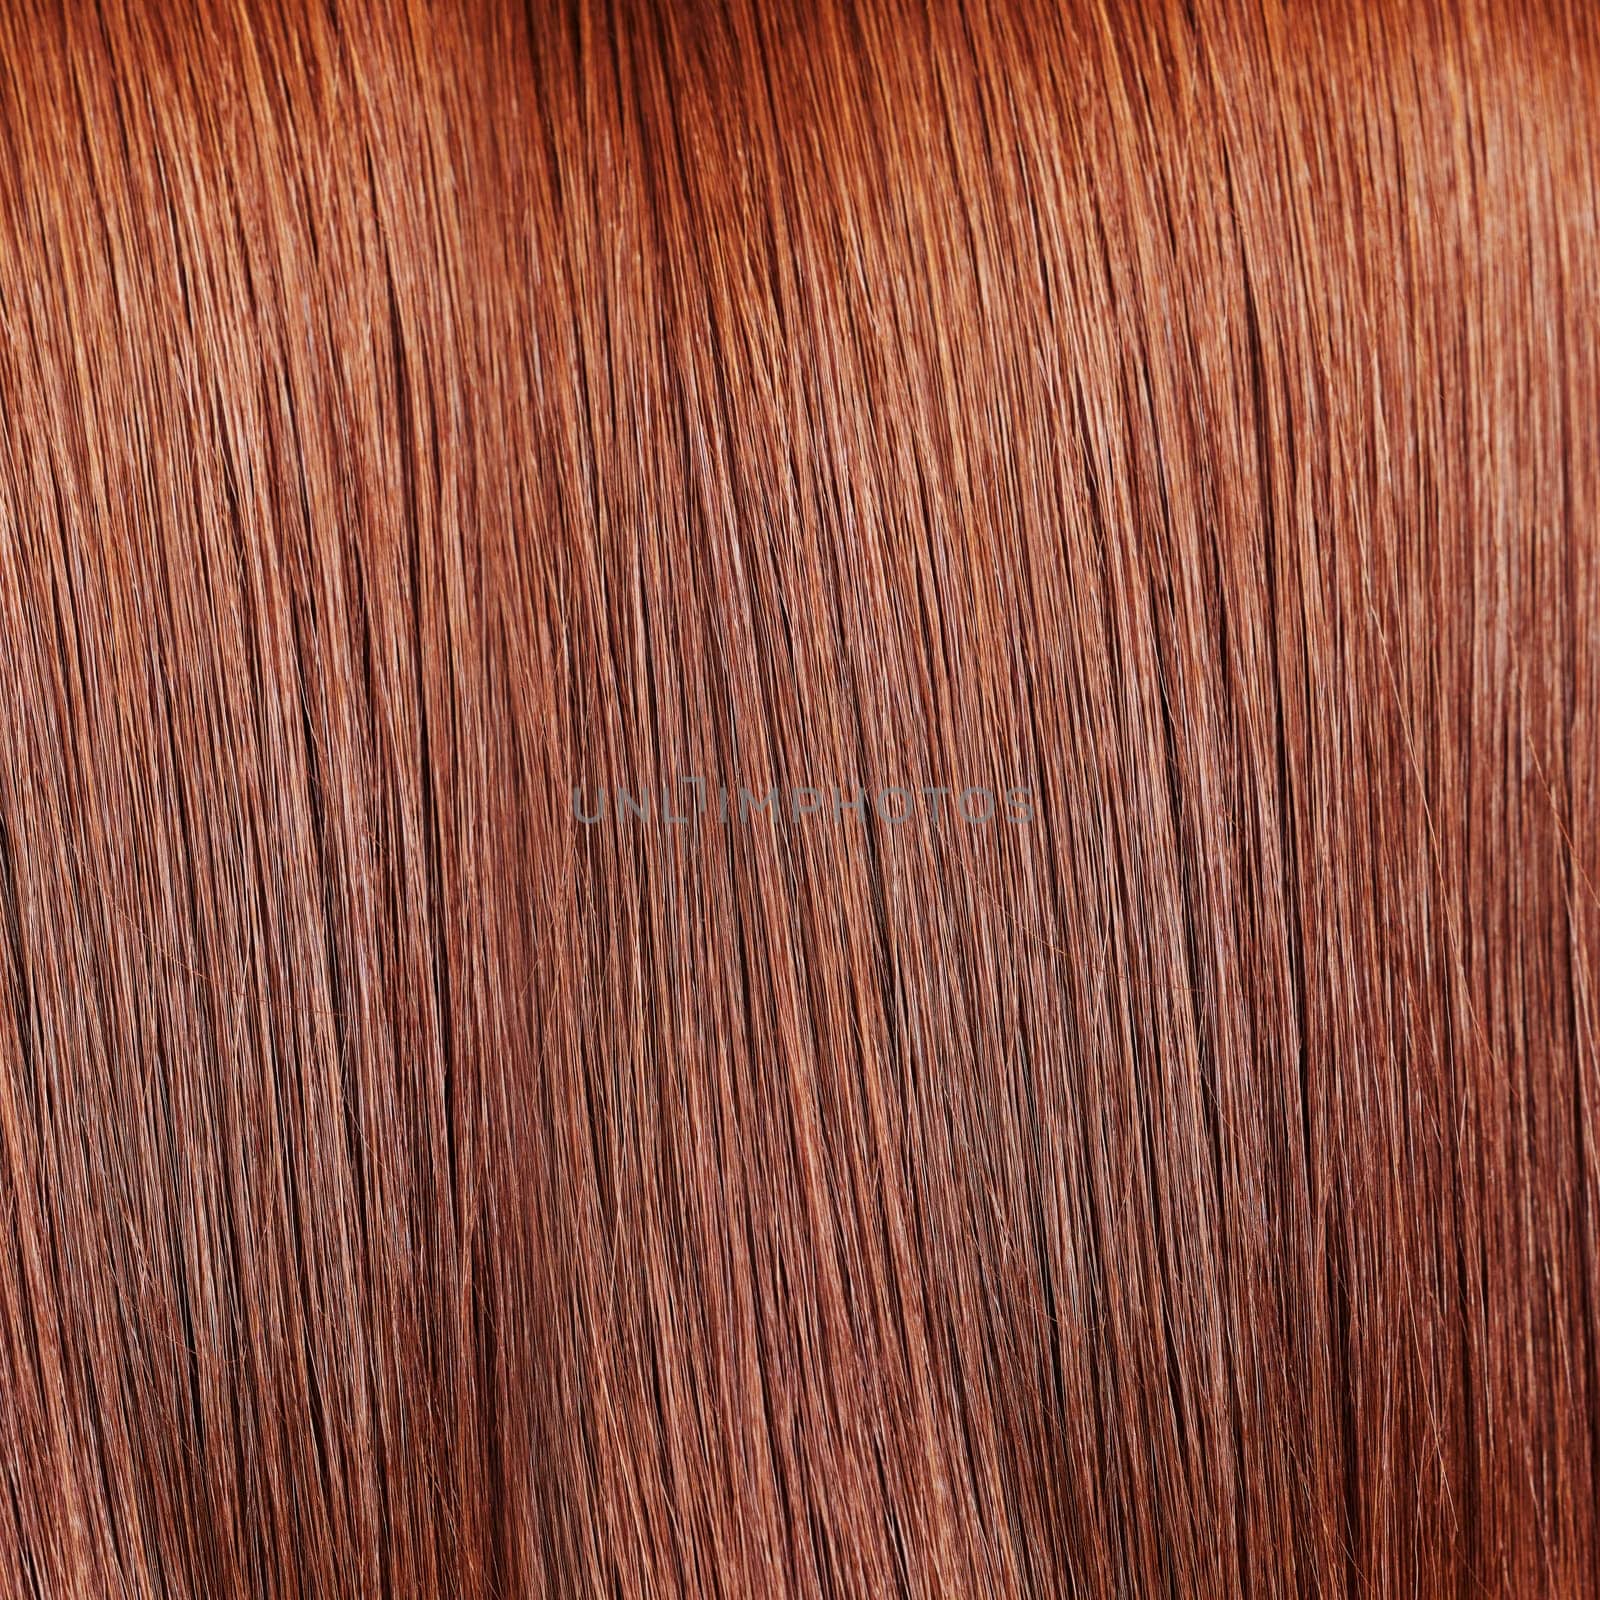 Zoom, textures and beauty with closeup of hair for shampoo, keratin and salon treatment. Glamour, colorful and shine with straight brunette extensions for growth, strand and pattern for background.